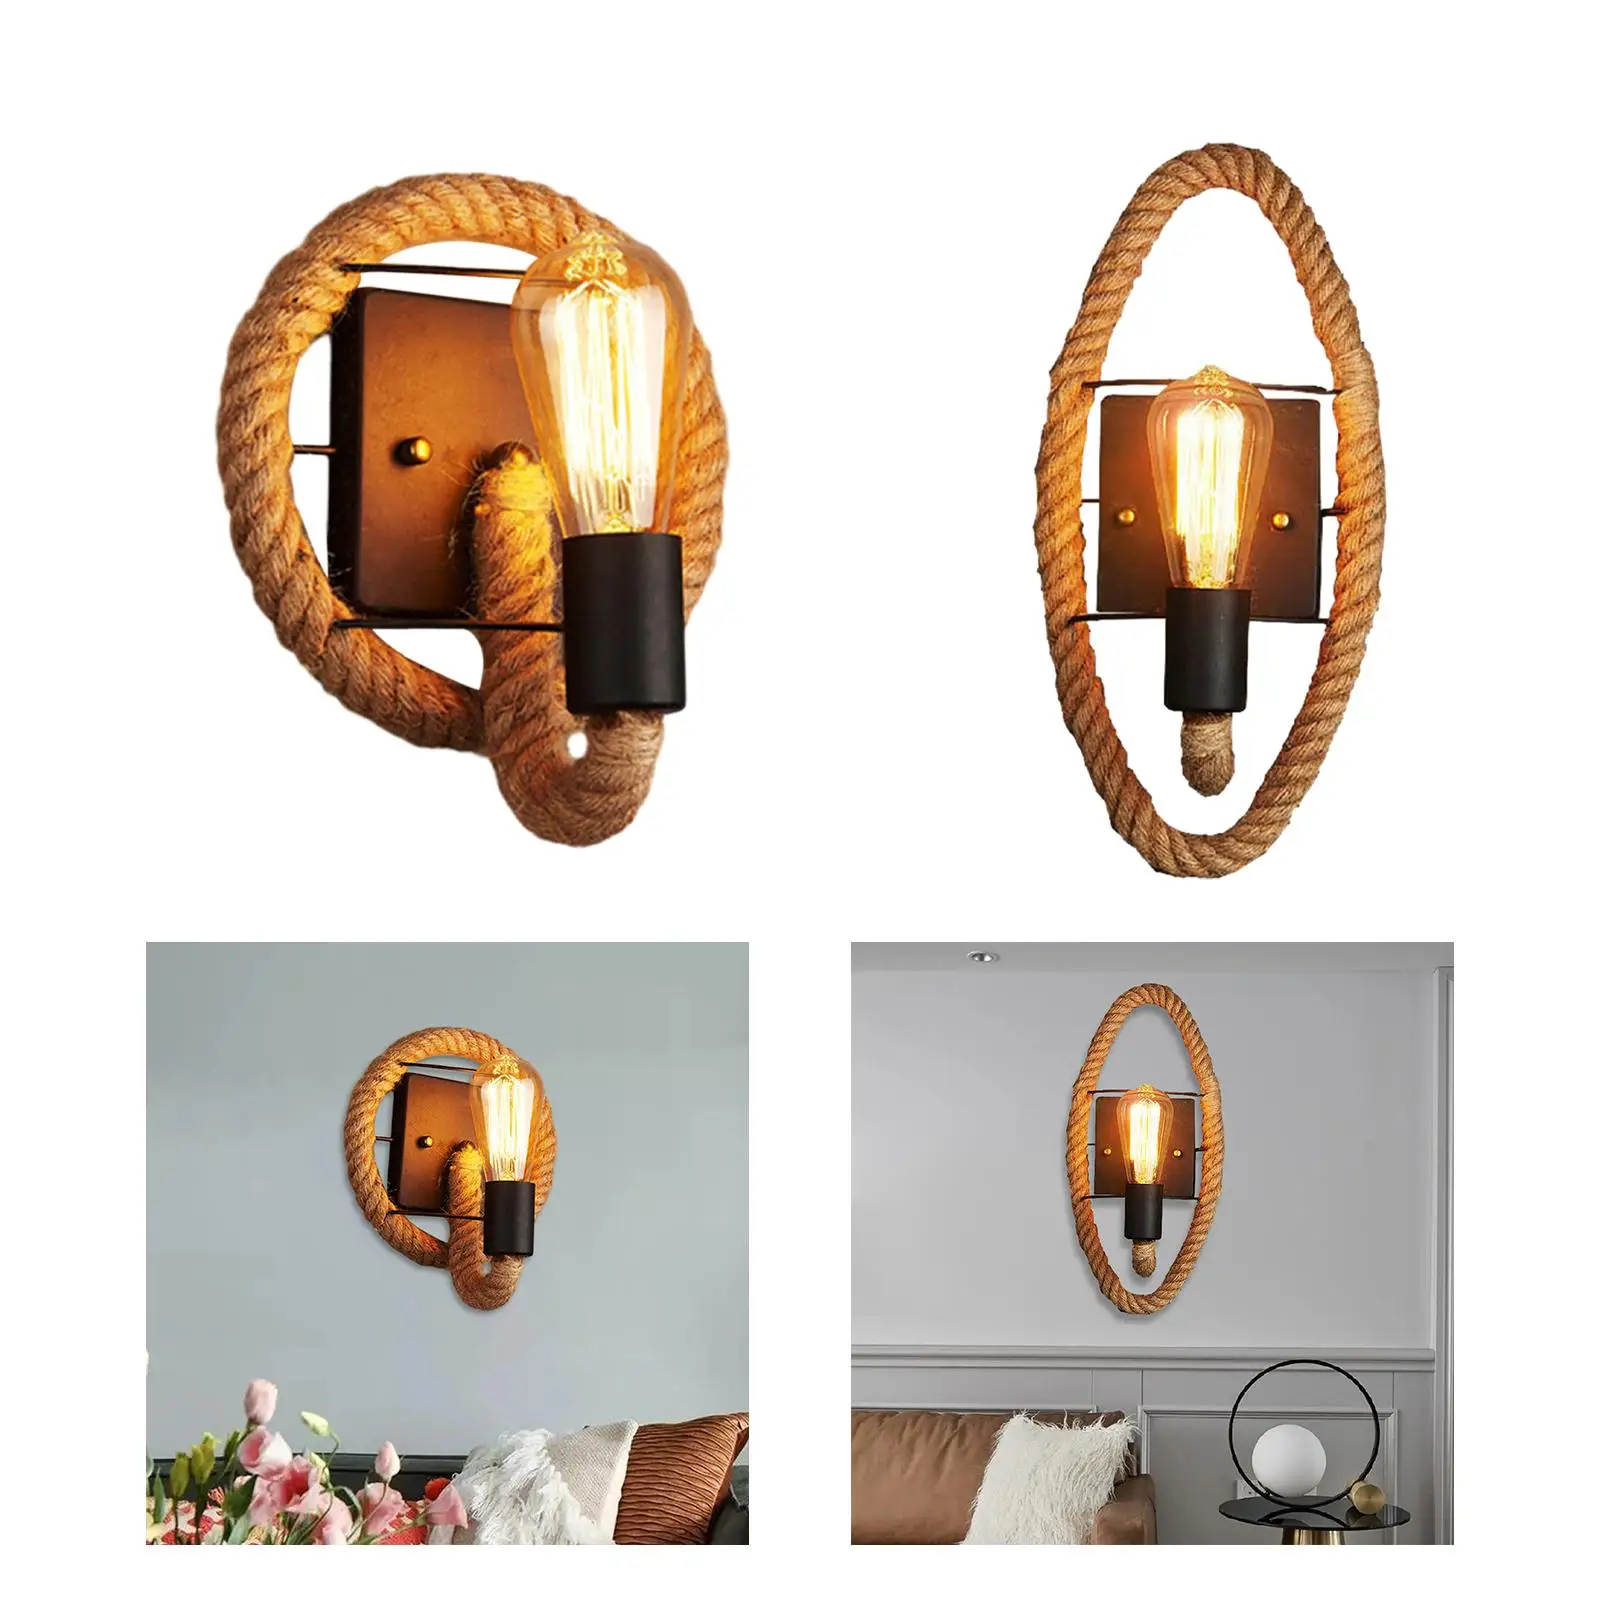 Retro Industrial Wall Sconce Creative Unique Wall Lights Fixture Retro Wall Mount Light for Hallway Balcony Dining Room Indoor